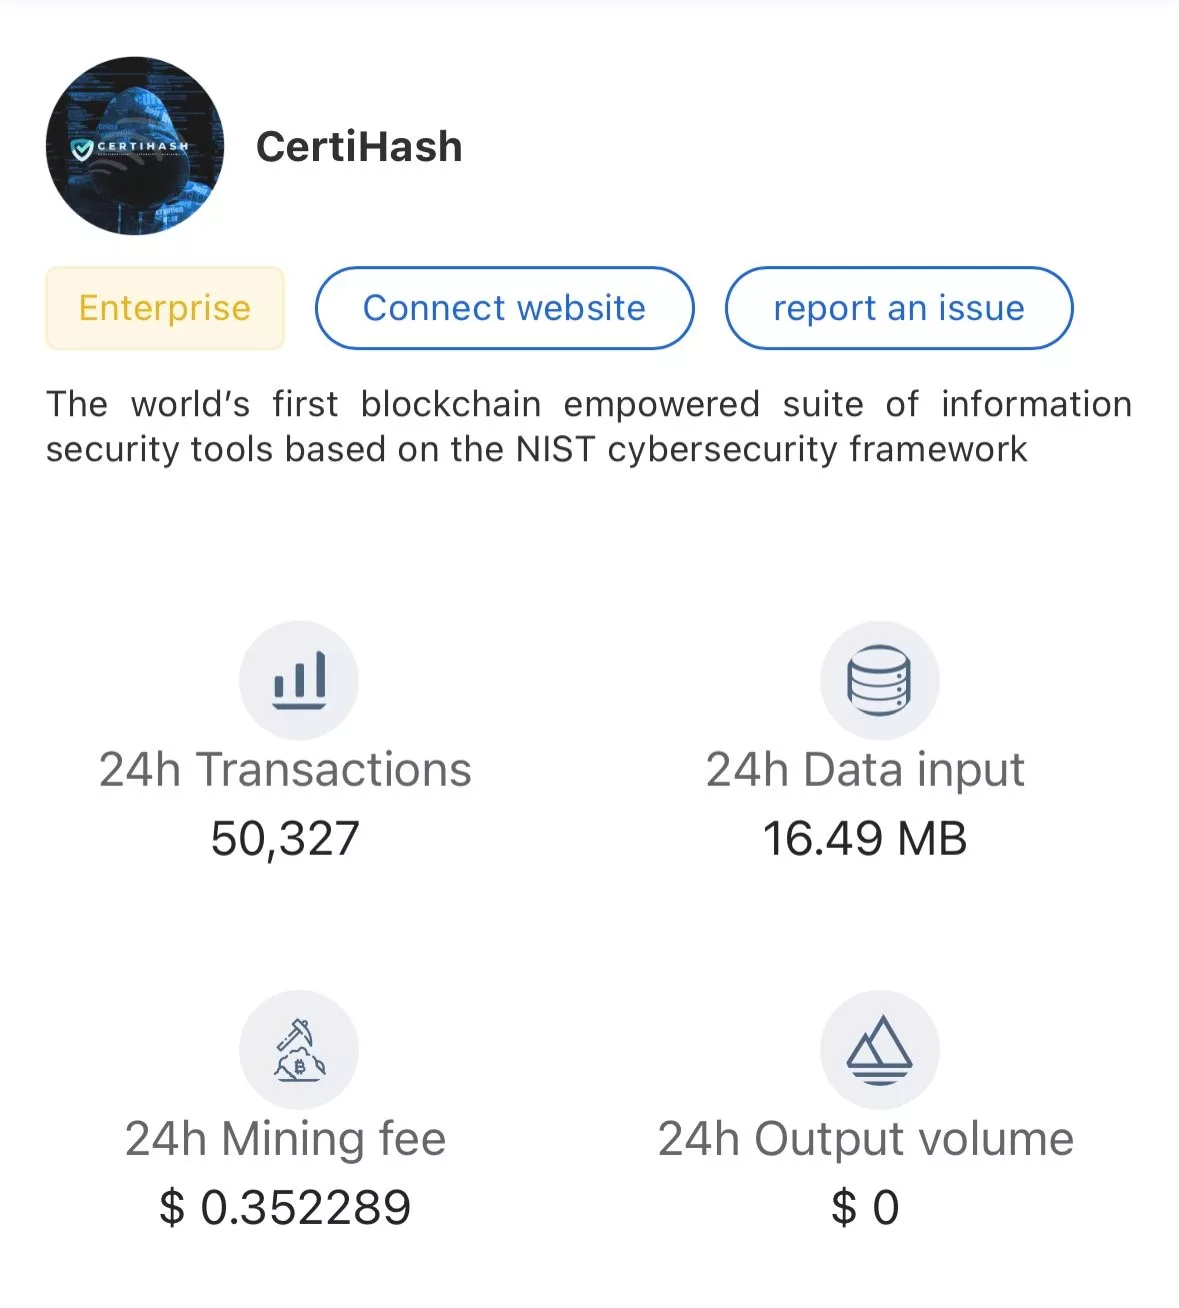 Certihash Enterprise information on transactions, data input, mining fee, and output volume in 24 hours